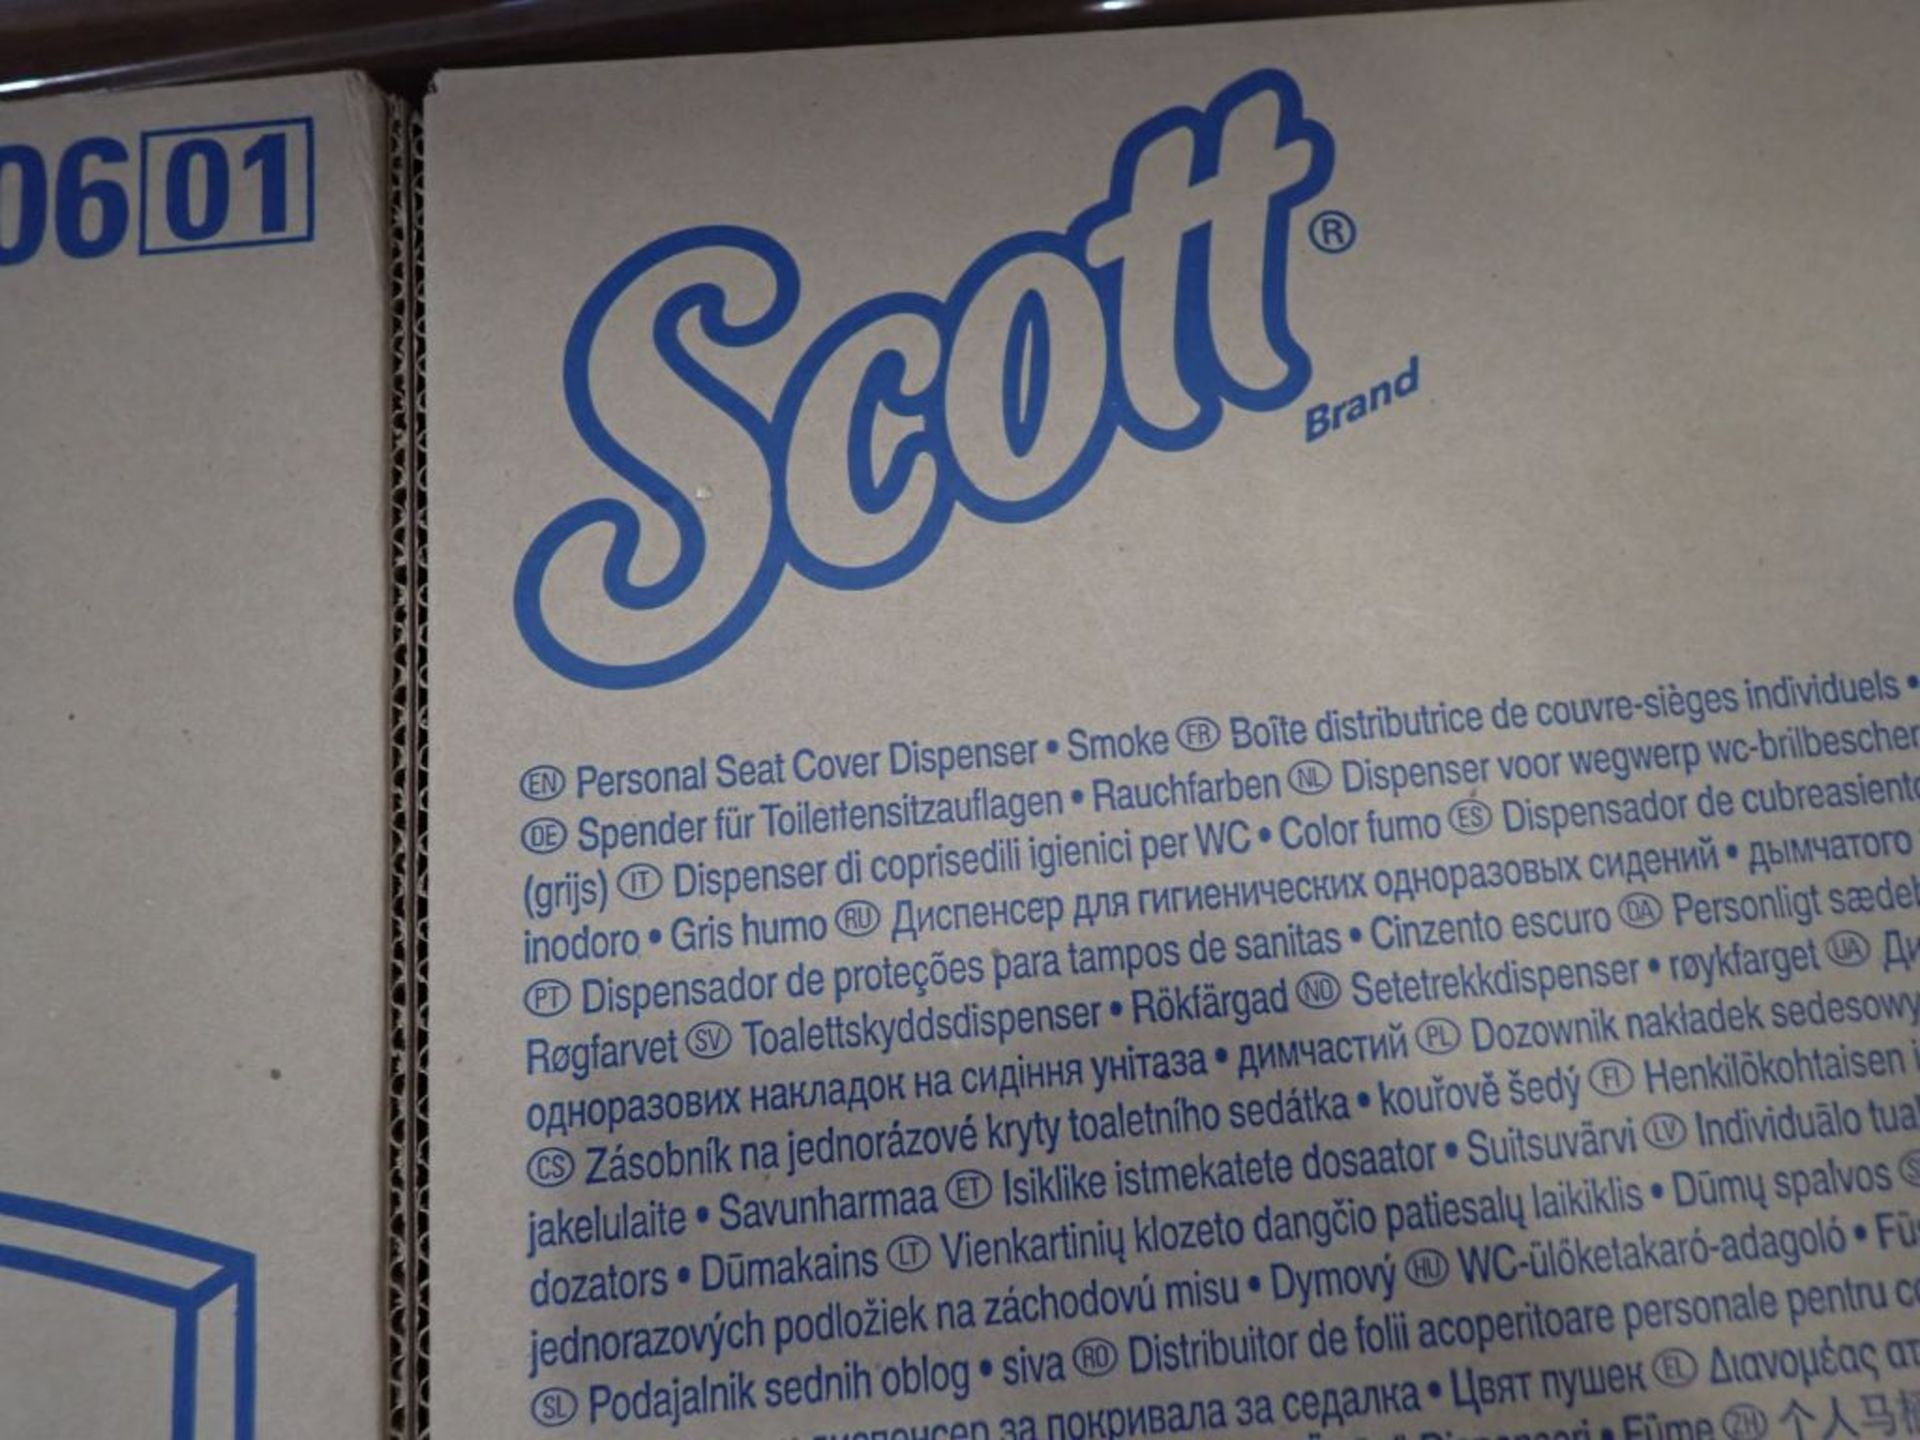 Lot of (24) Cases of Scott Seat Covers - Image 4 of 5